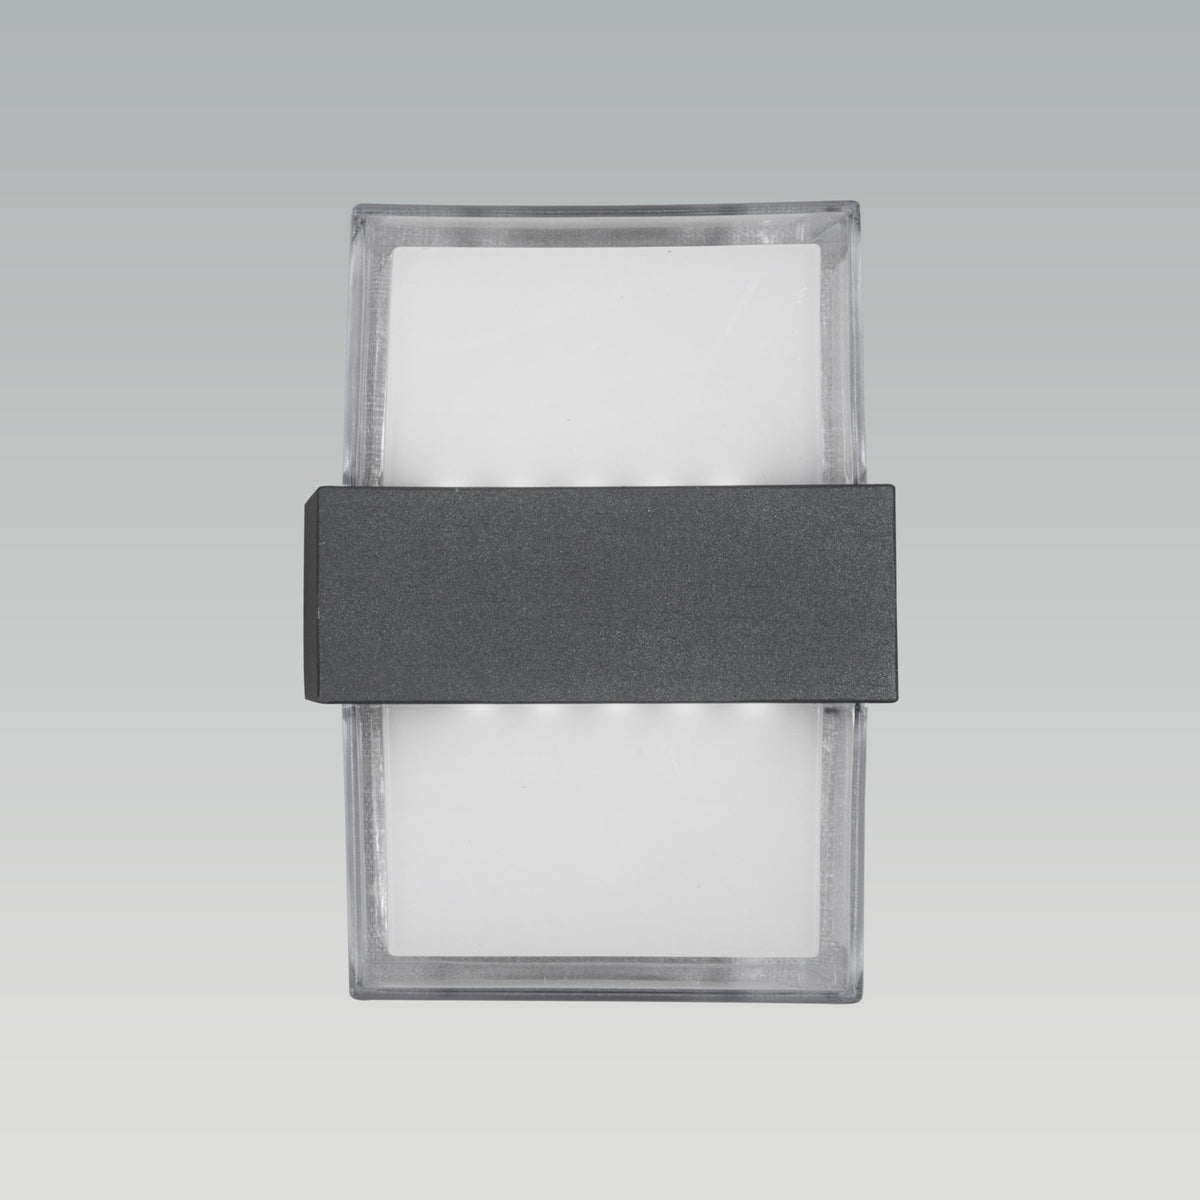 Vision Square LED Outdoor Wall Light online